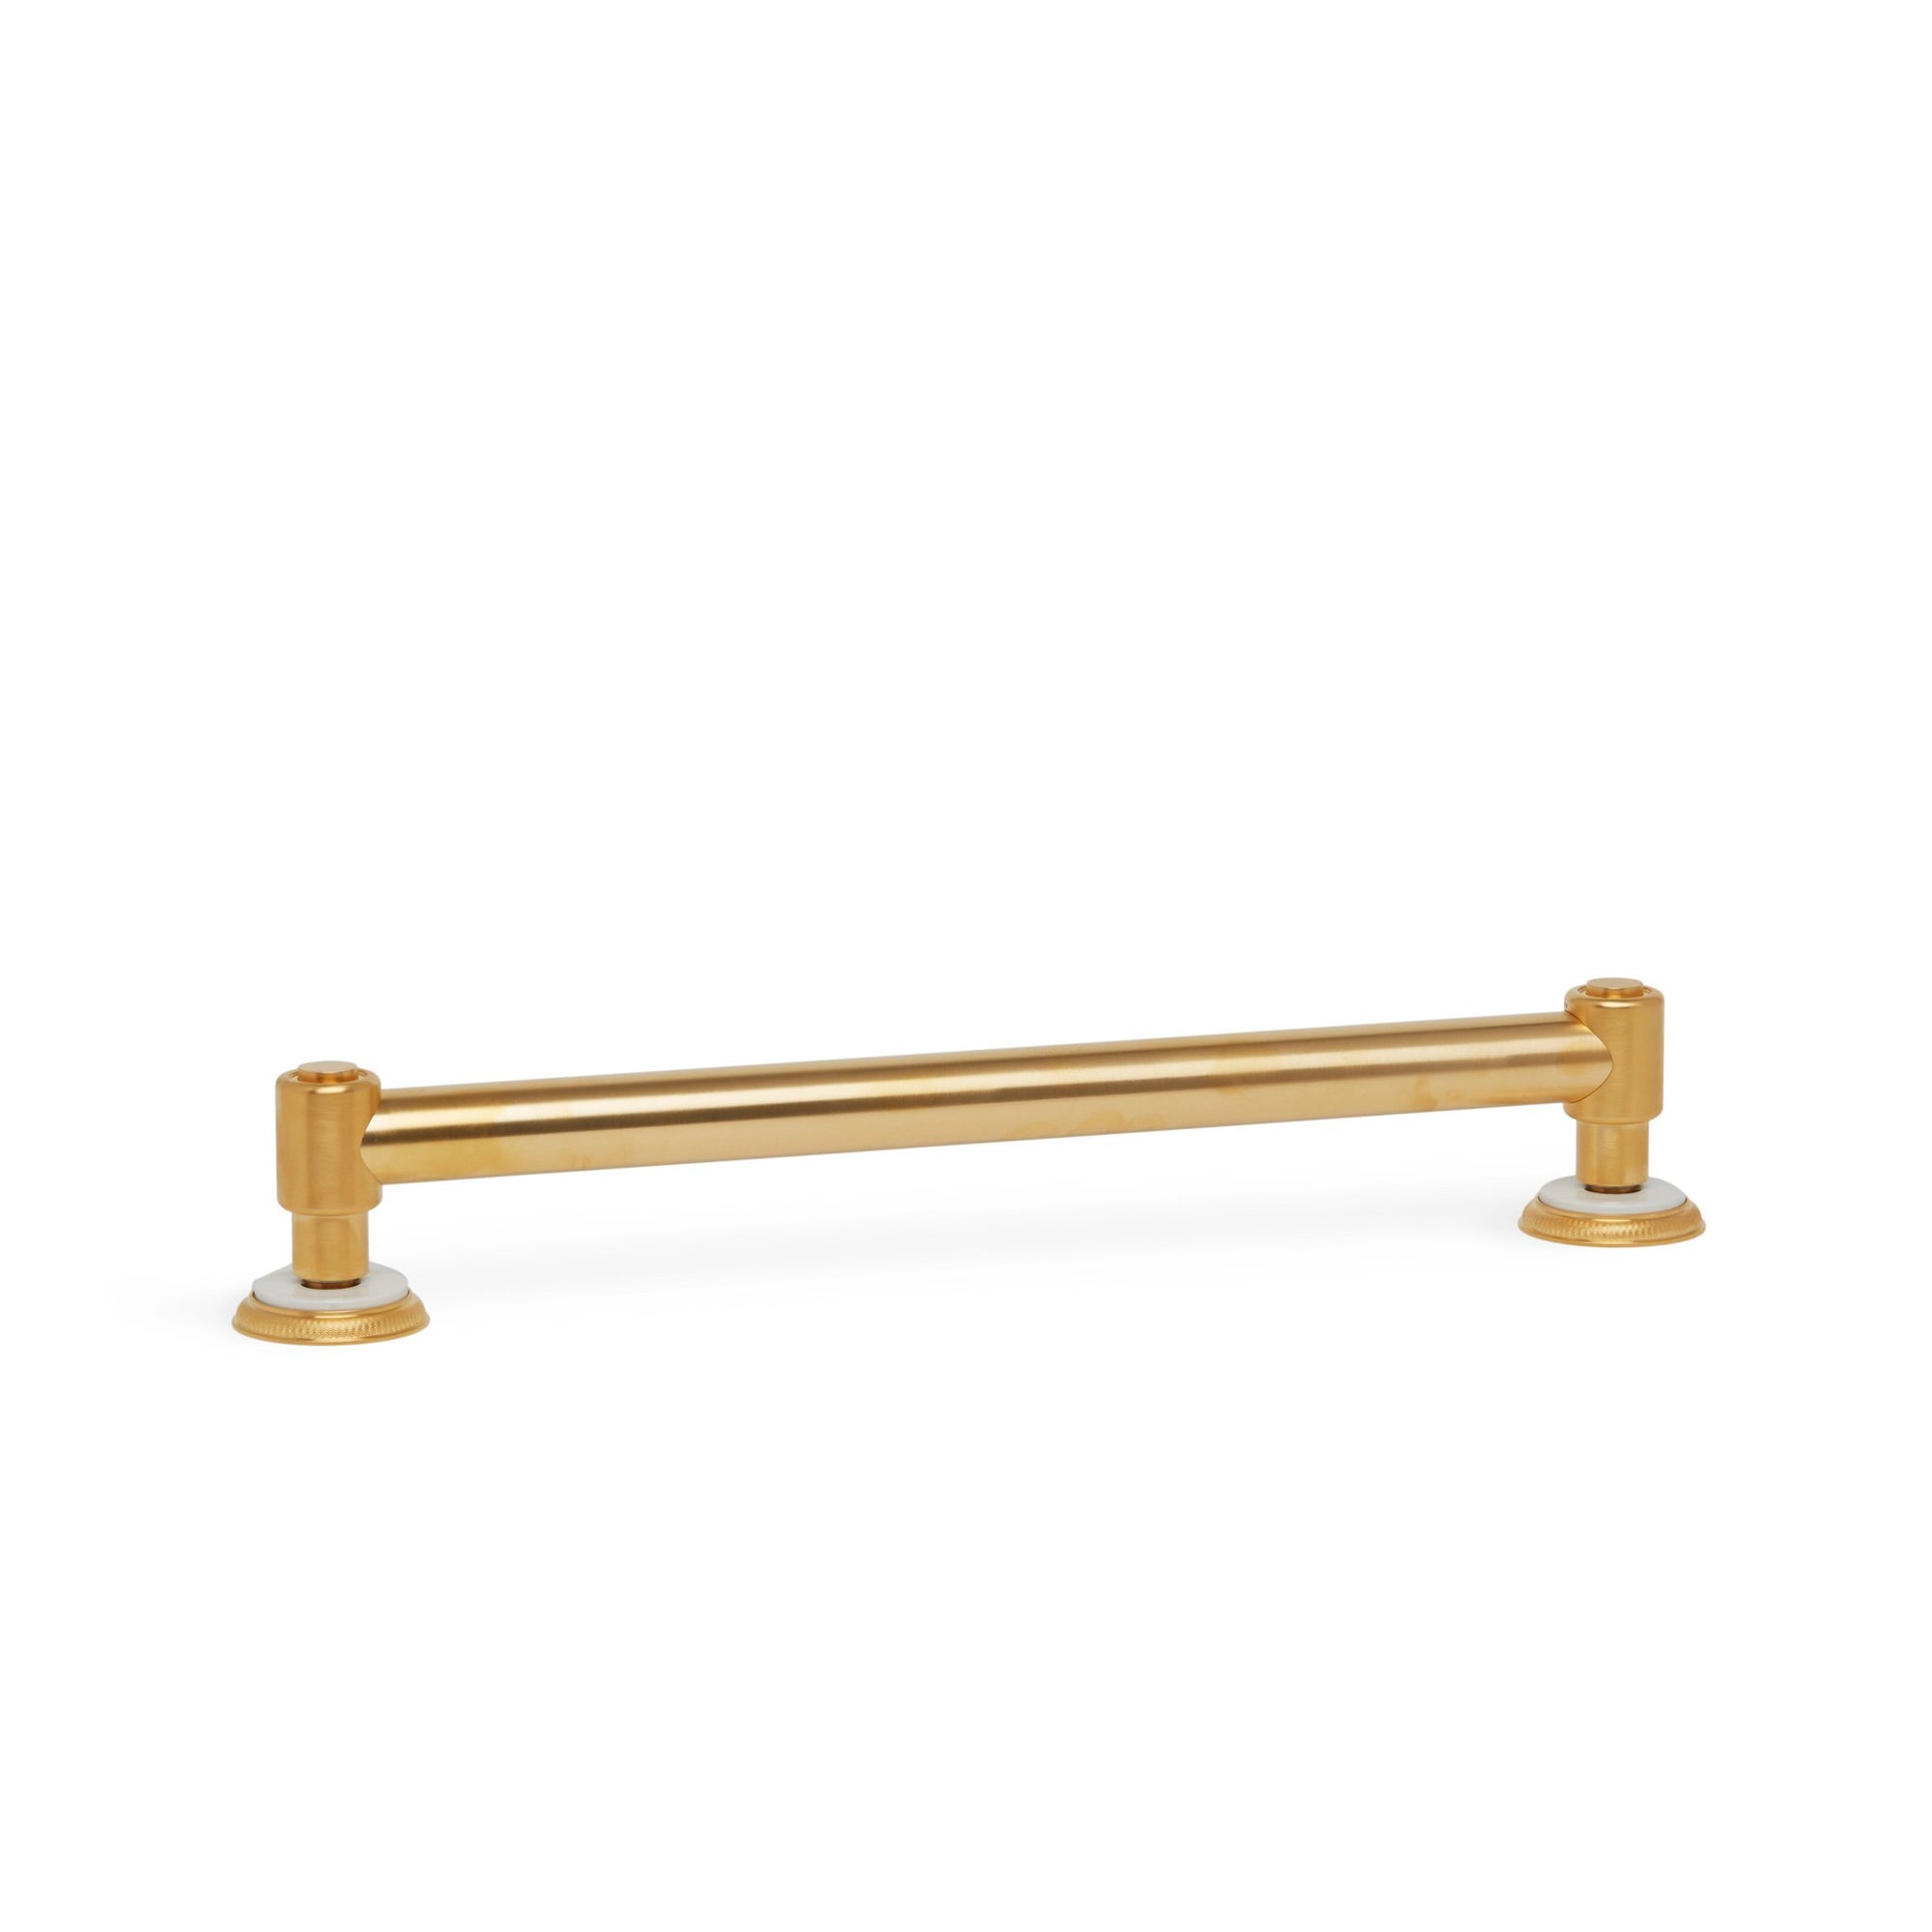 3695GB-WHT-GP Sherle Wagner International Knurled Grab Bar with White insert in Gold Plate metal finish